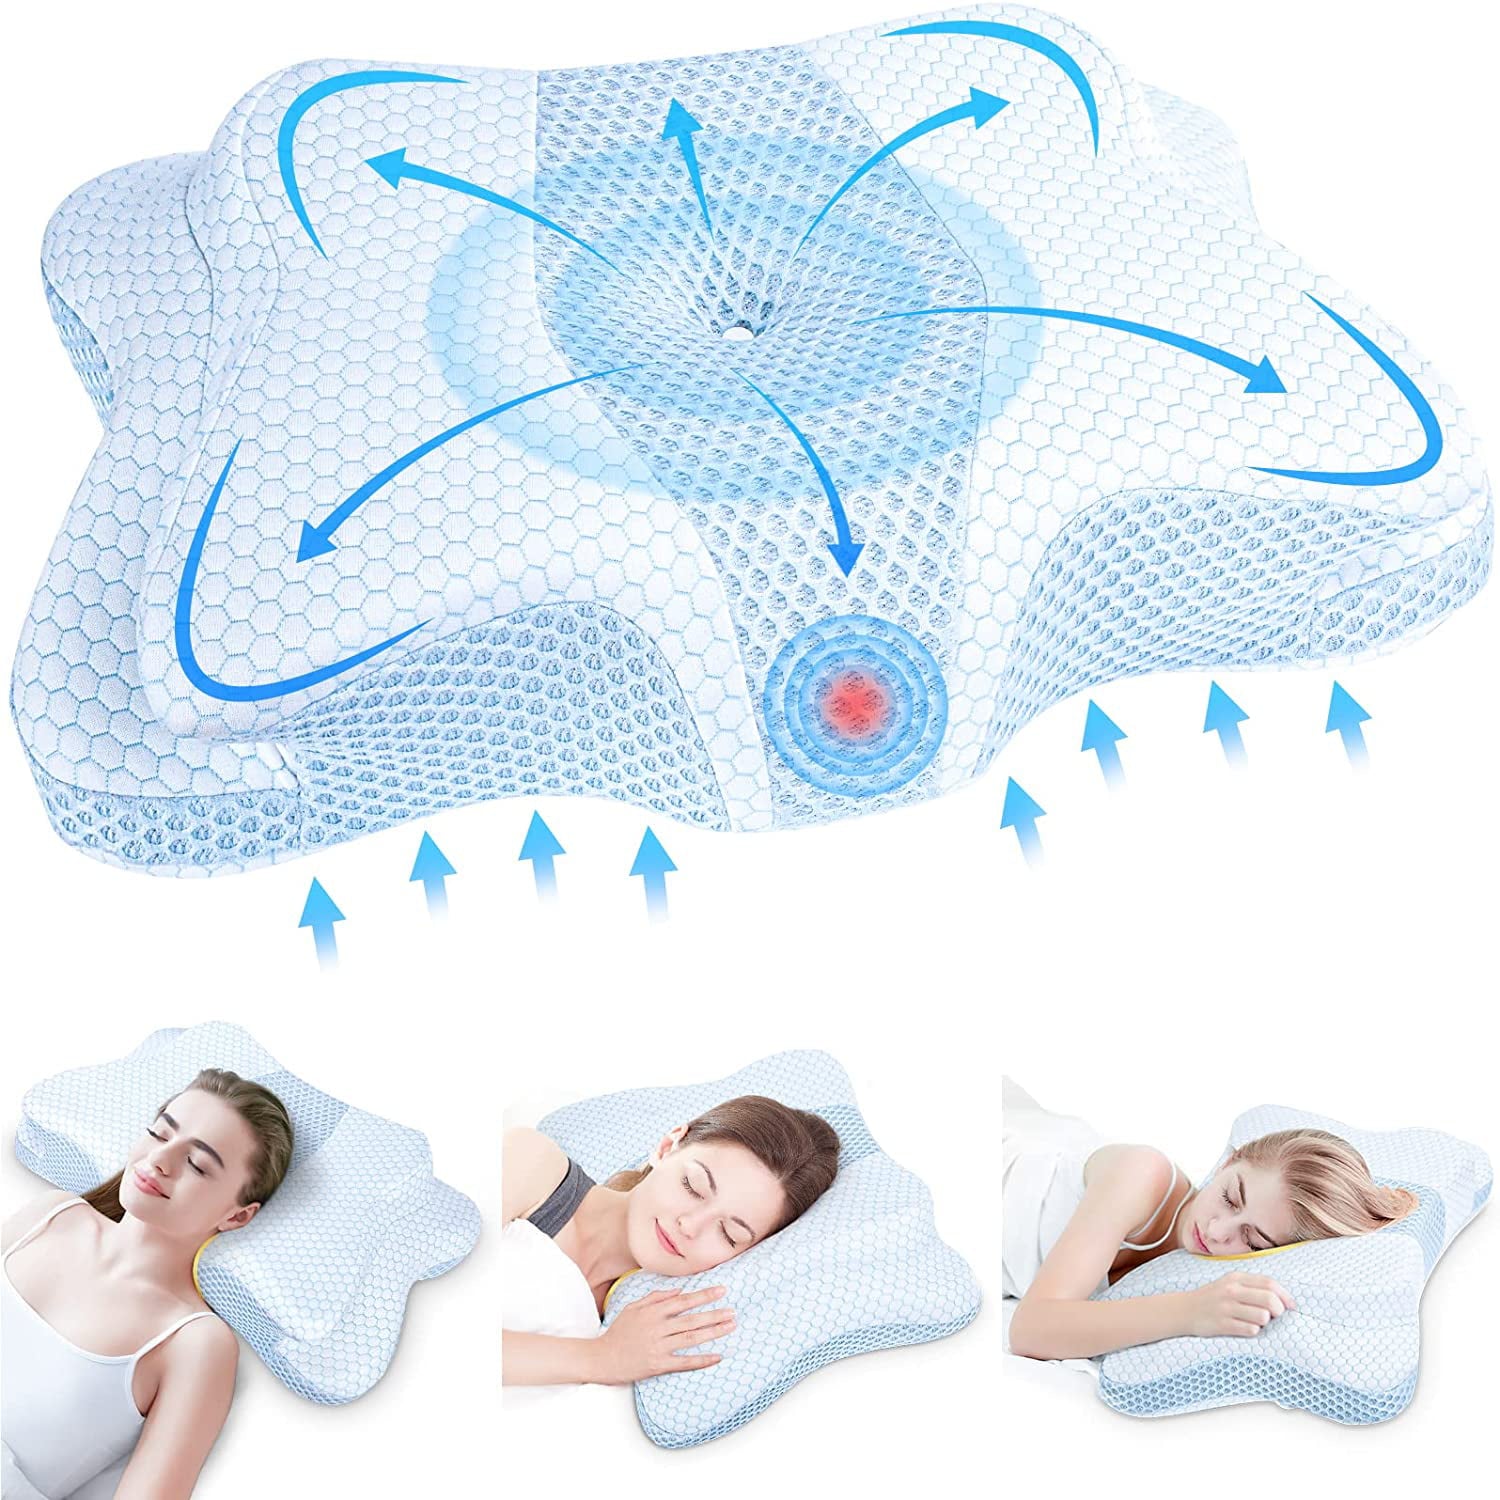 DIKI Cervical Memory Foam Pillow - Adjustable Contour Pillow for Neck Pain Relief, Orthopedic Neck Support Sleeping Pillow for Side Back Stomach Sleeper, Ergonomic Bed Pillow for Neck Pain, Blue White